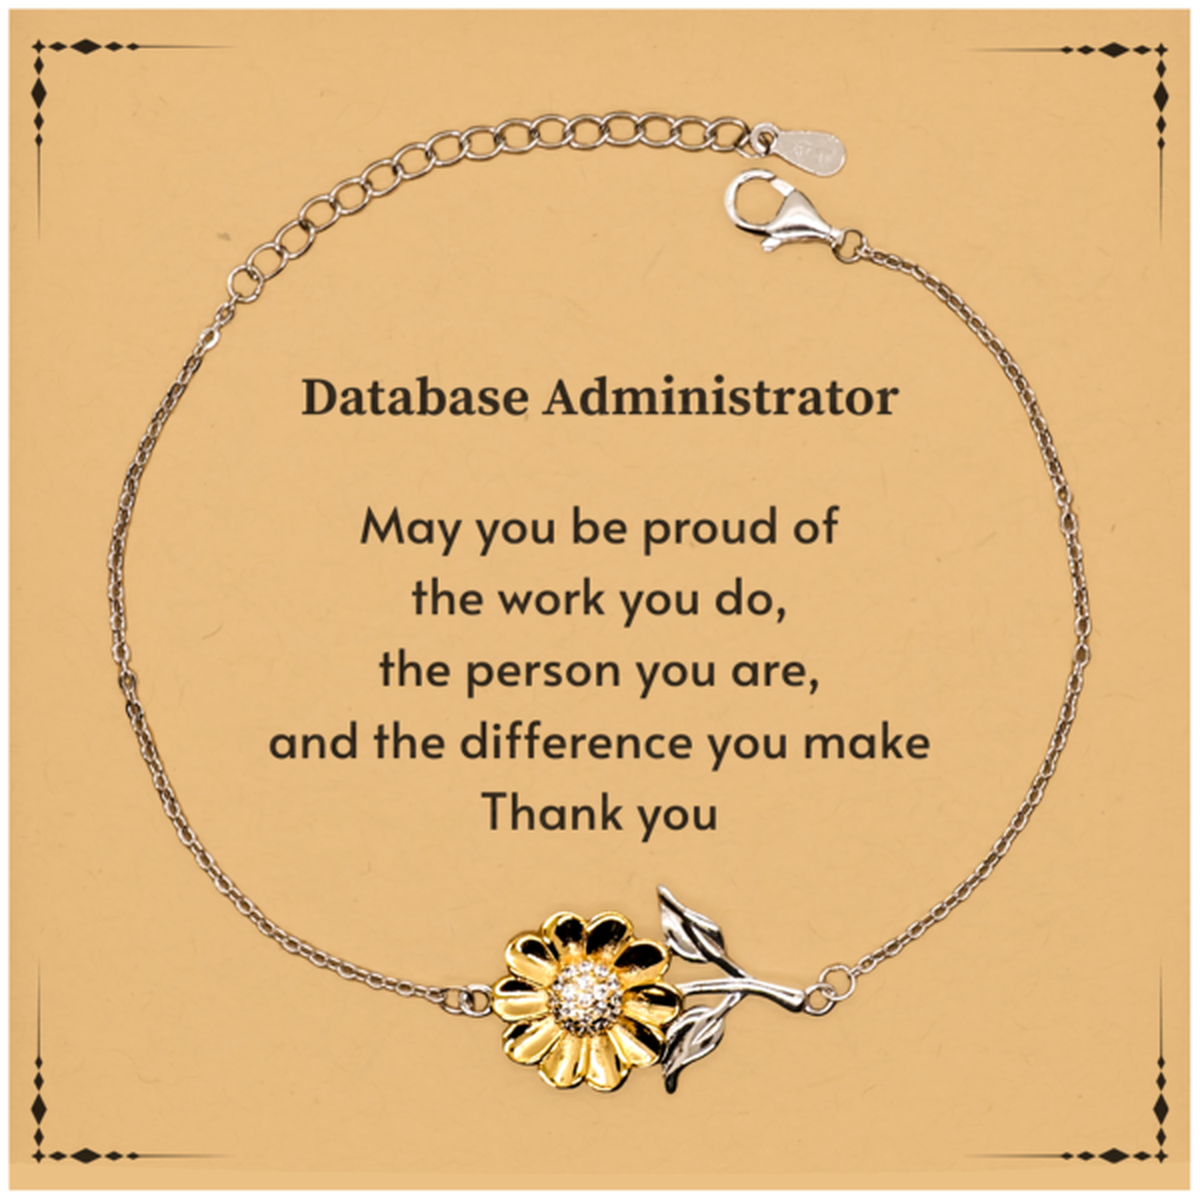 Heartwarming Sunflower Bracelet Retirement Coworkers Gifts for Database Administrator, Database Administrator May You be proud of the work you do, the person you are Gifts for Boss Men Women Friends